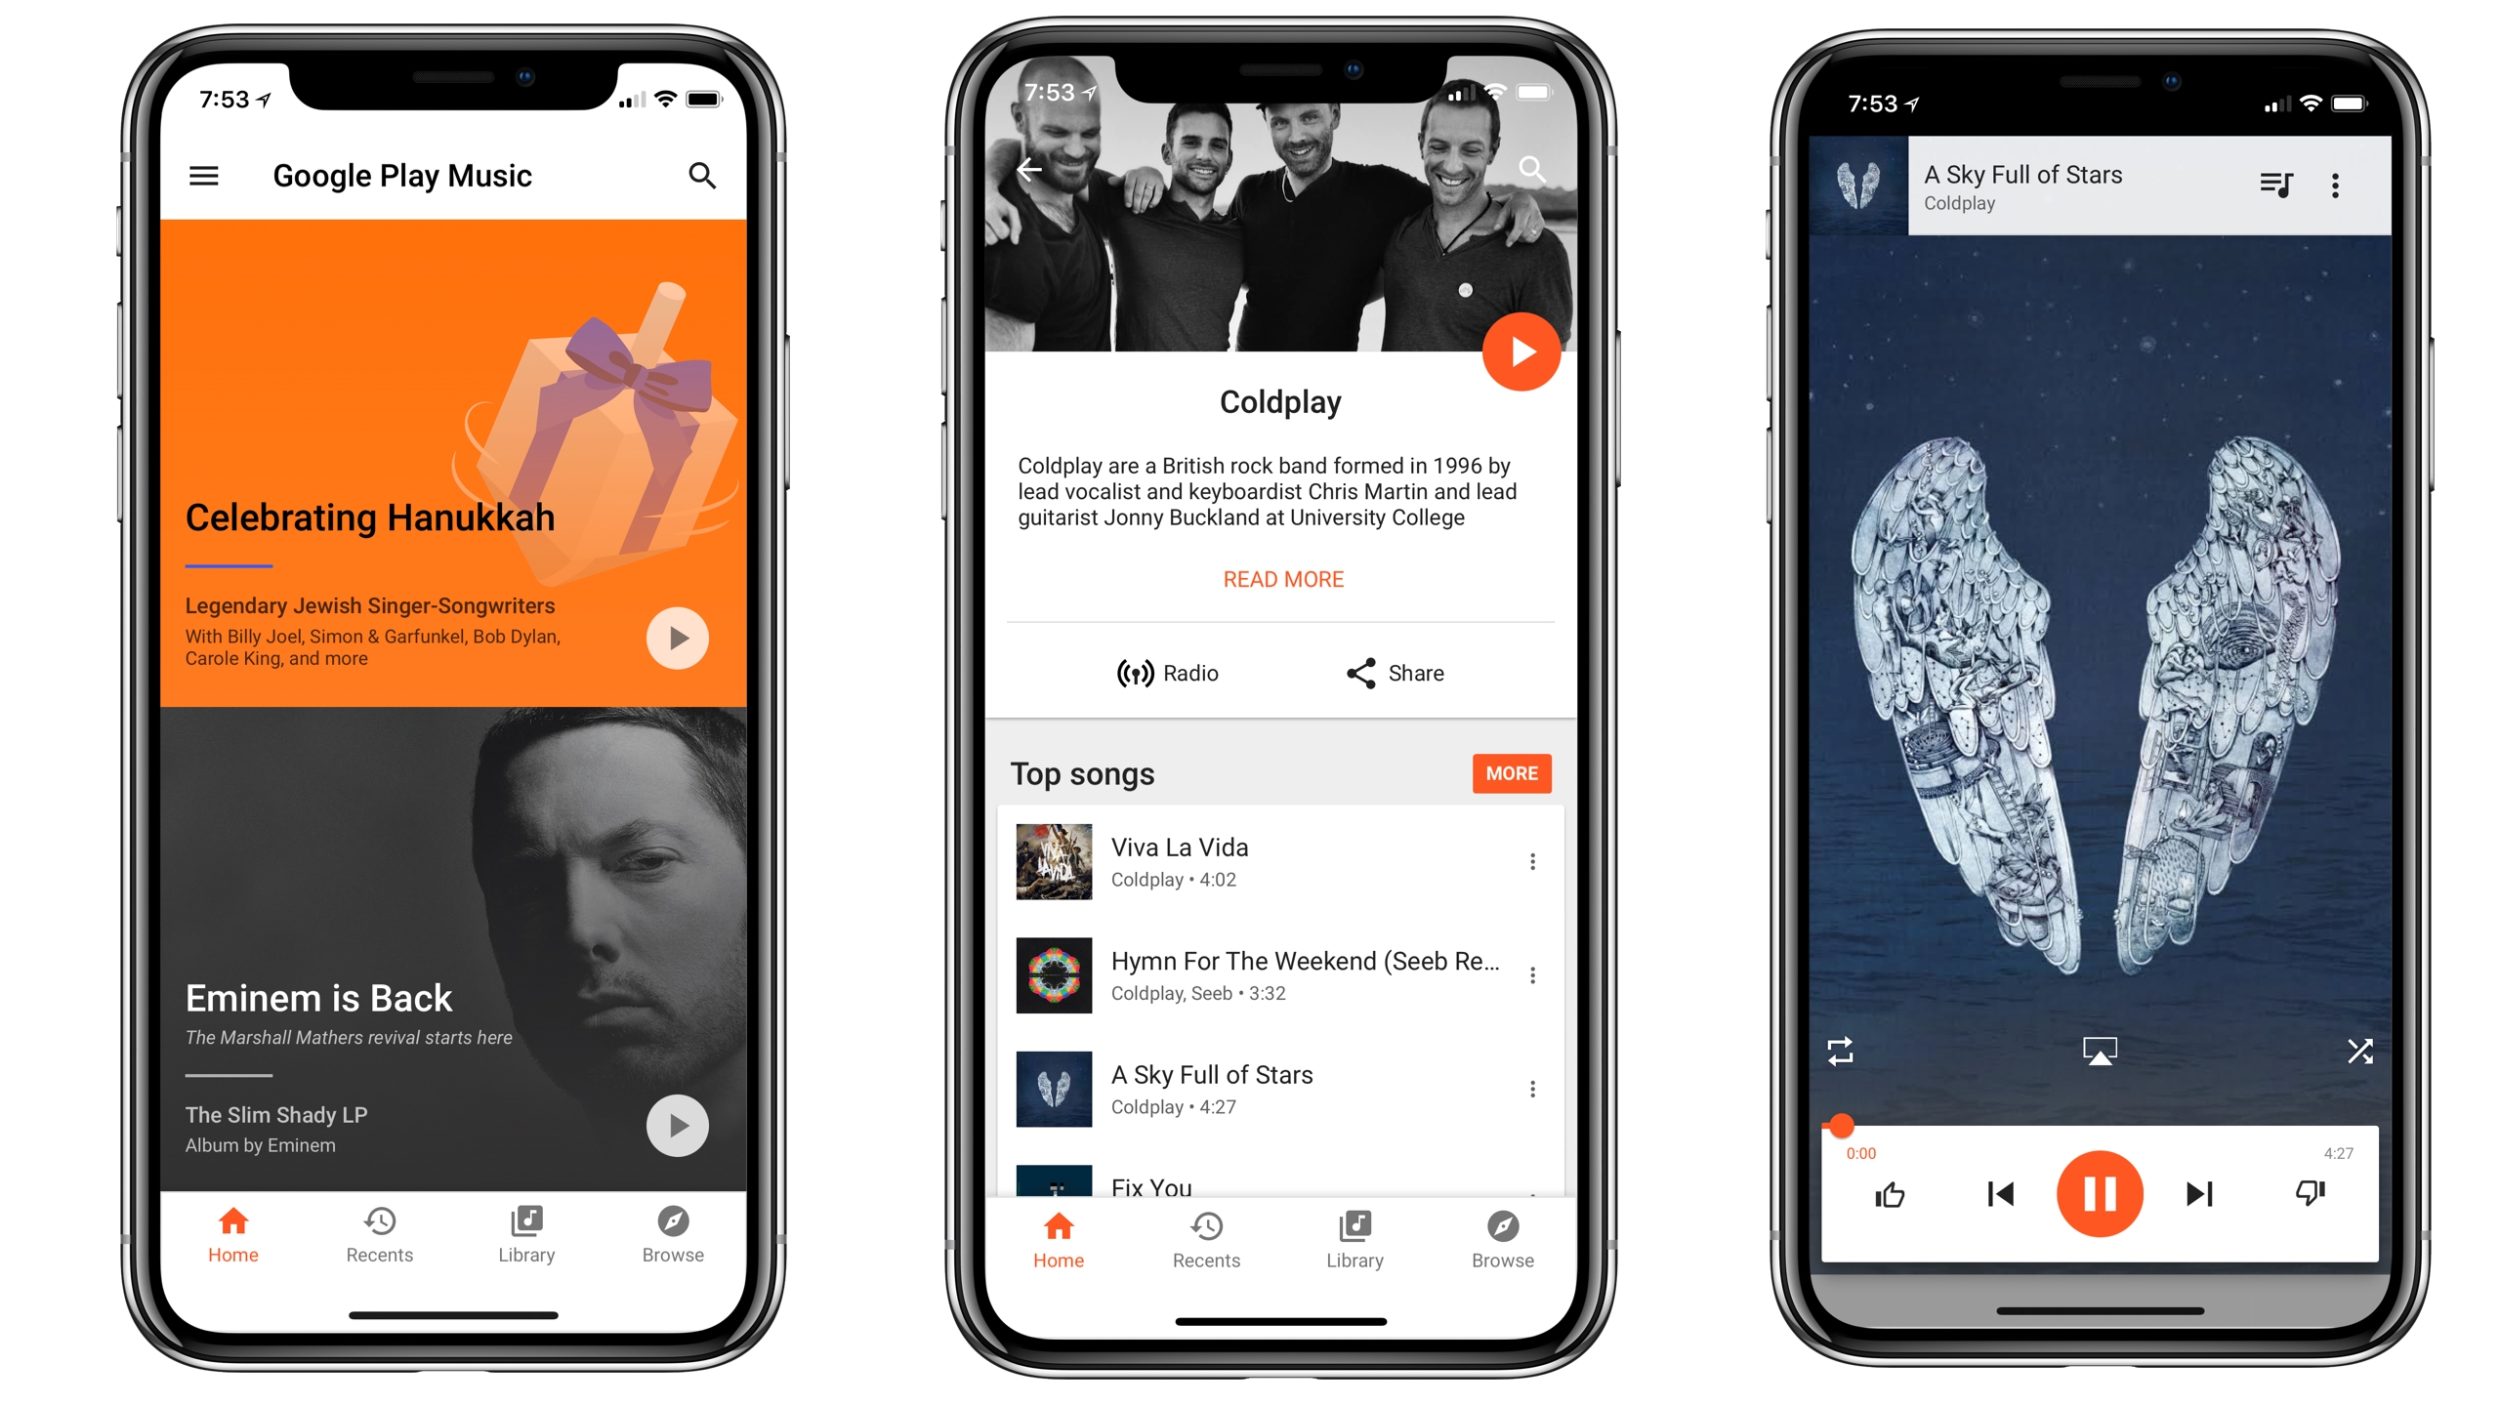 Google Play Music updated with support for iPhone X